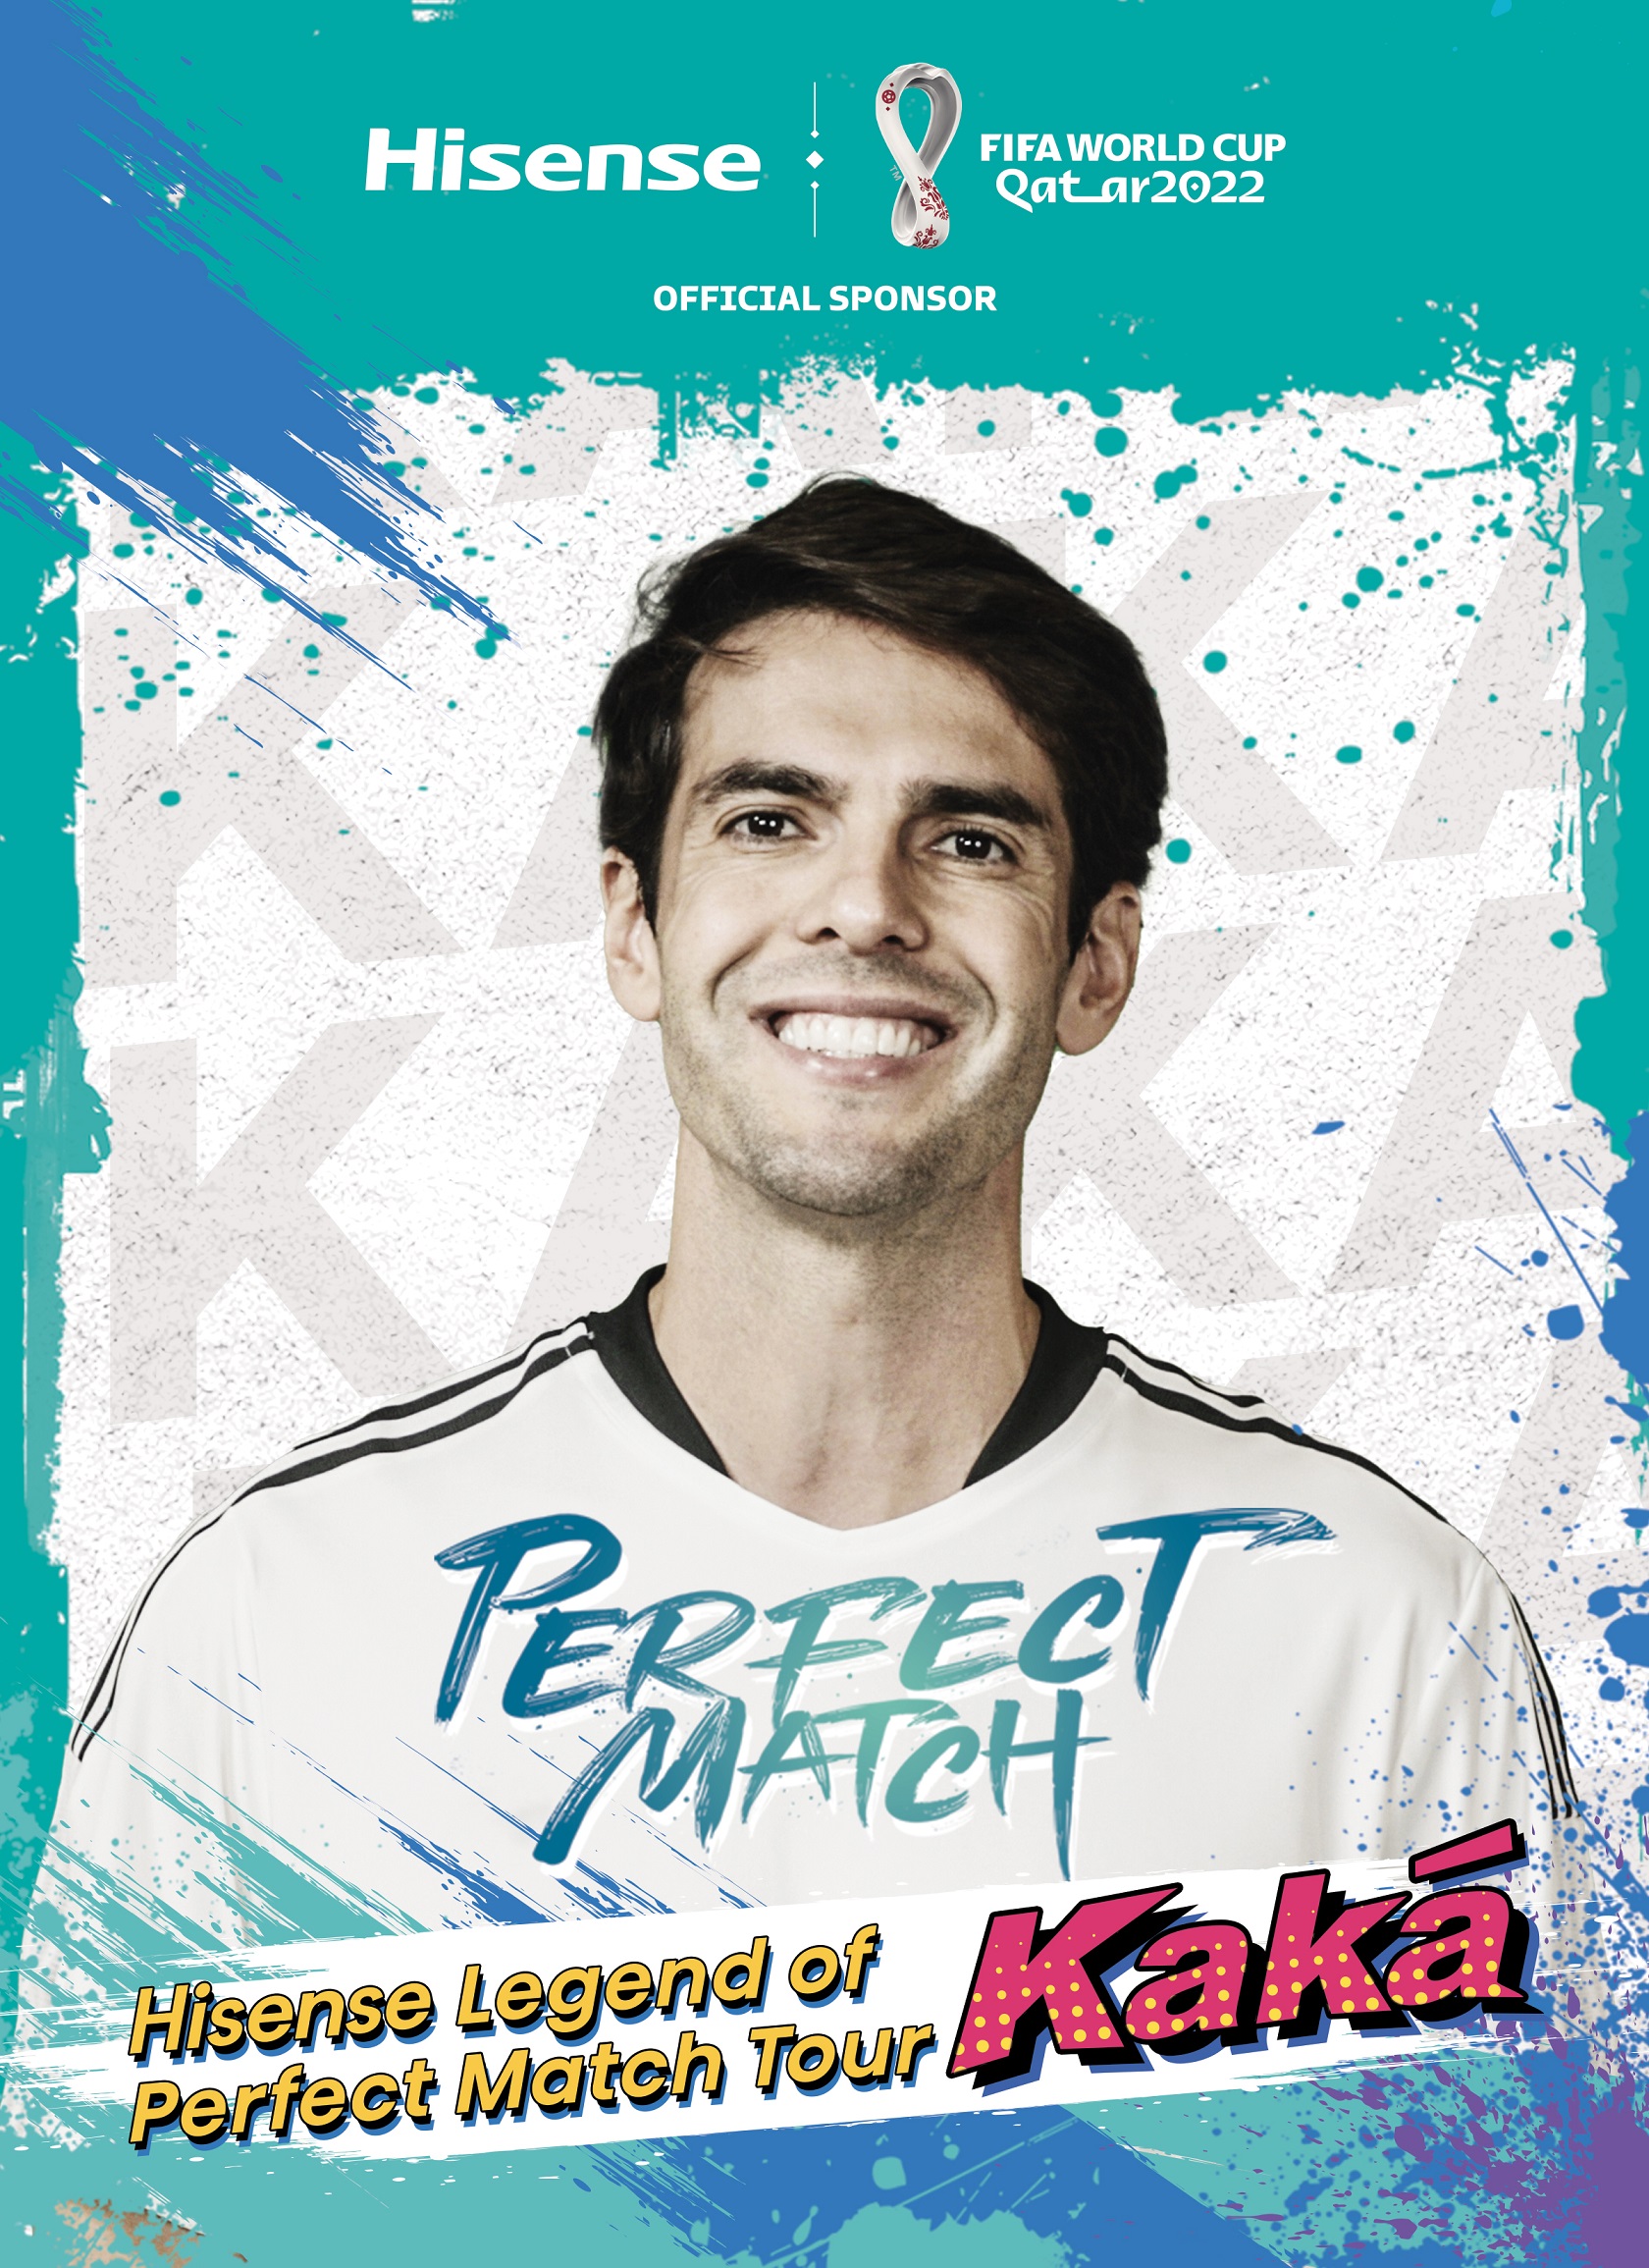 Hisense begins its FIFA World Cup 2022™ Campaign “Perfect Match Tour” with Football Legend Kaká